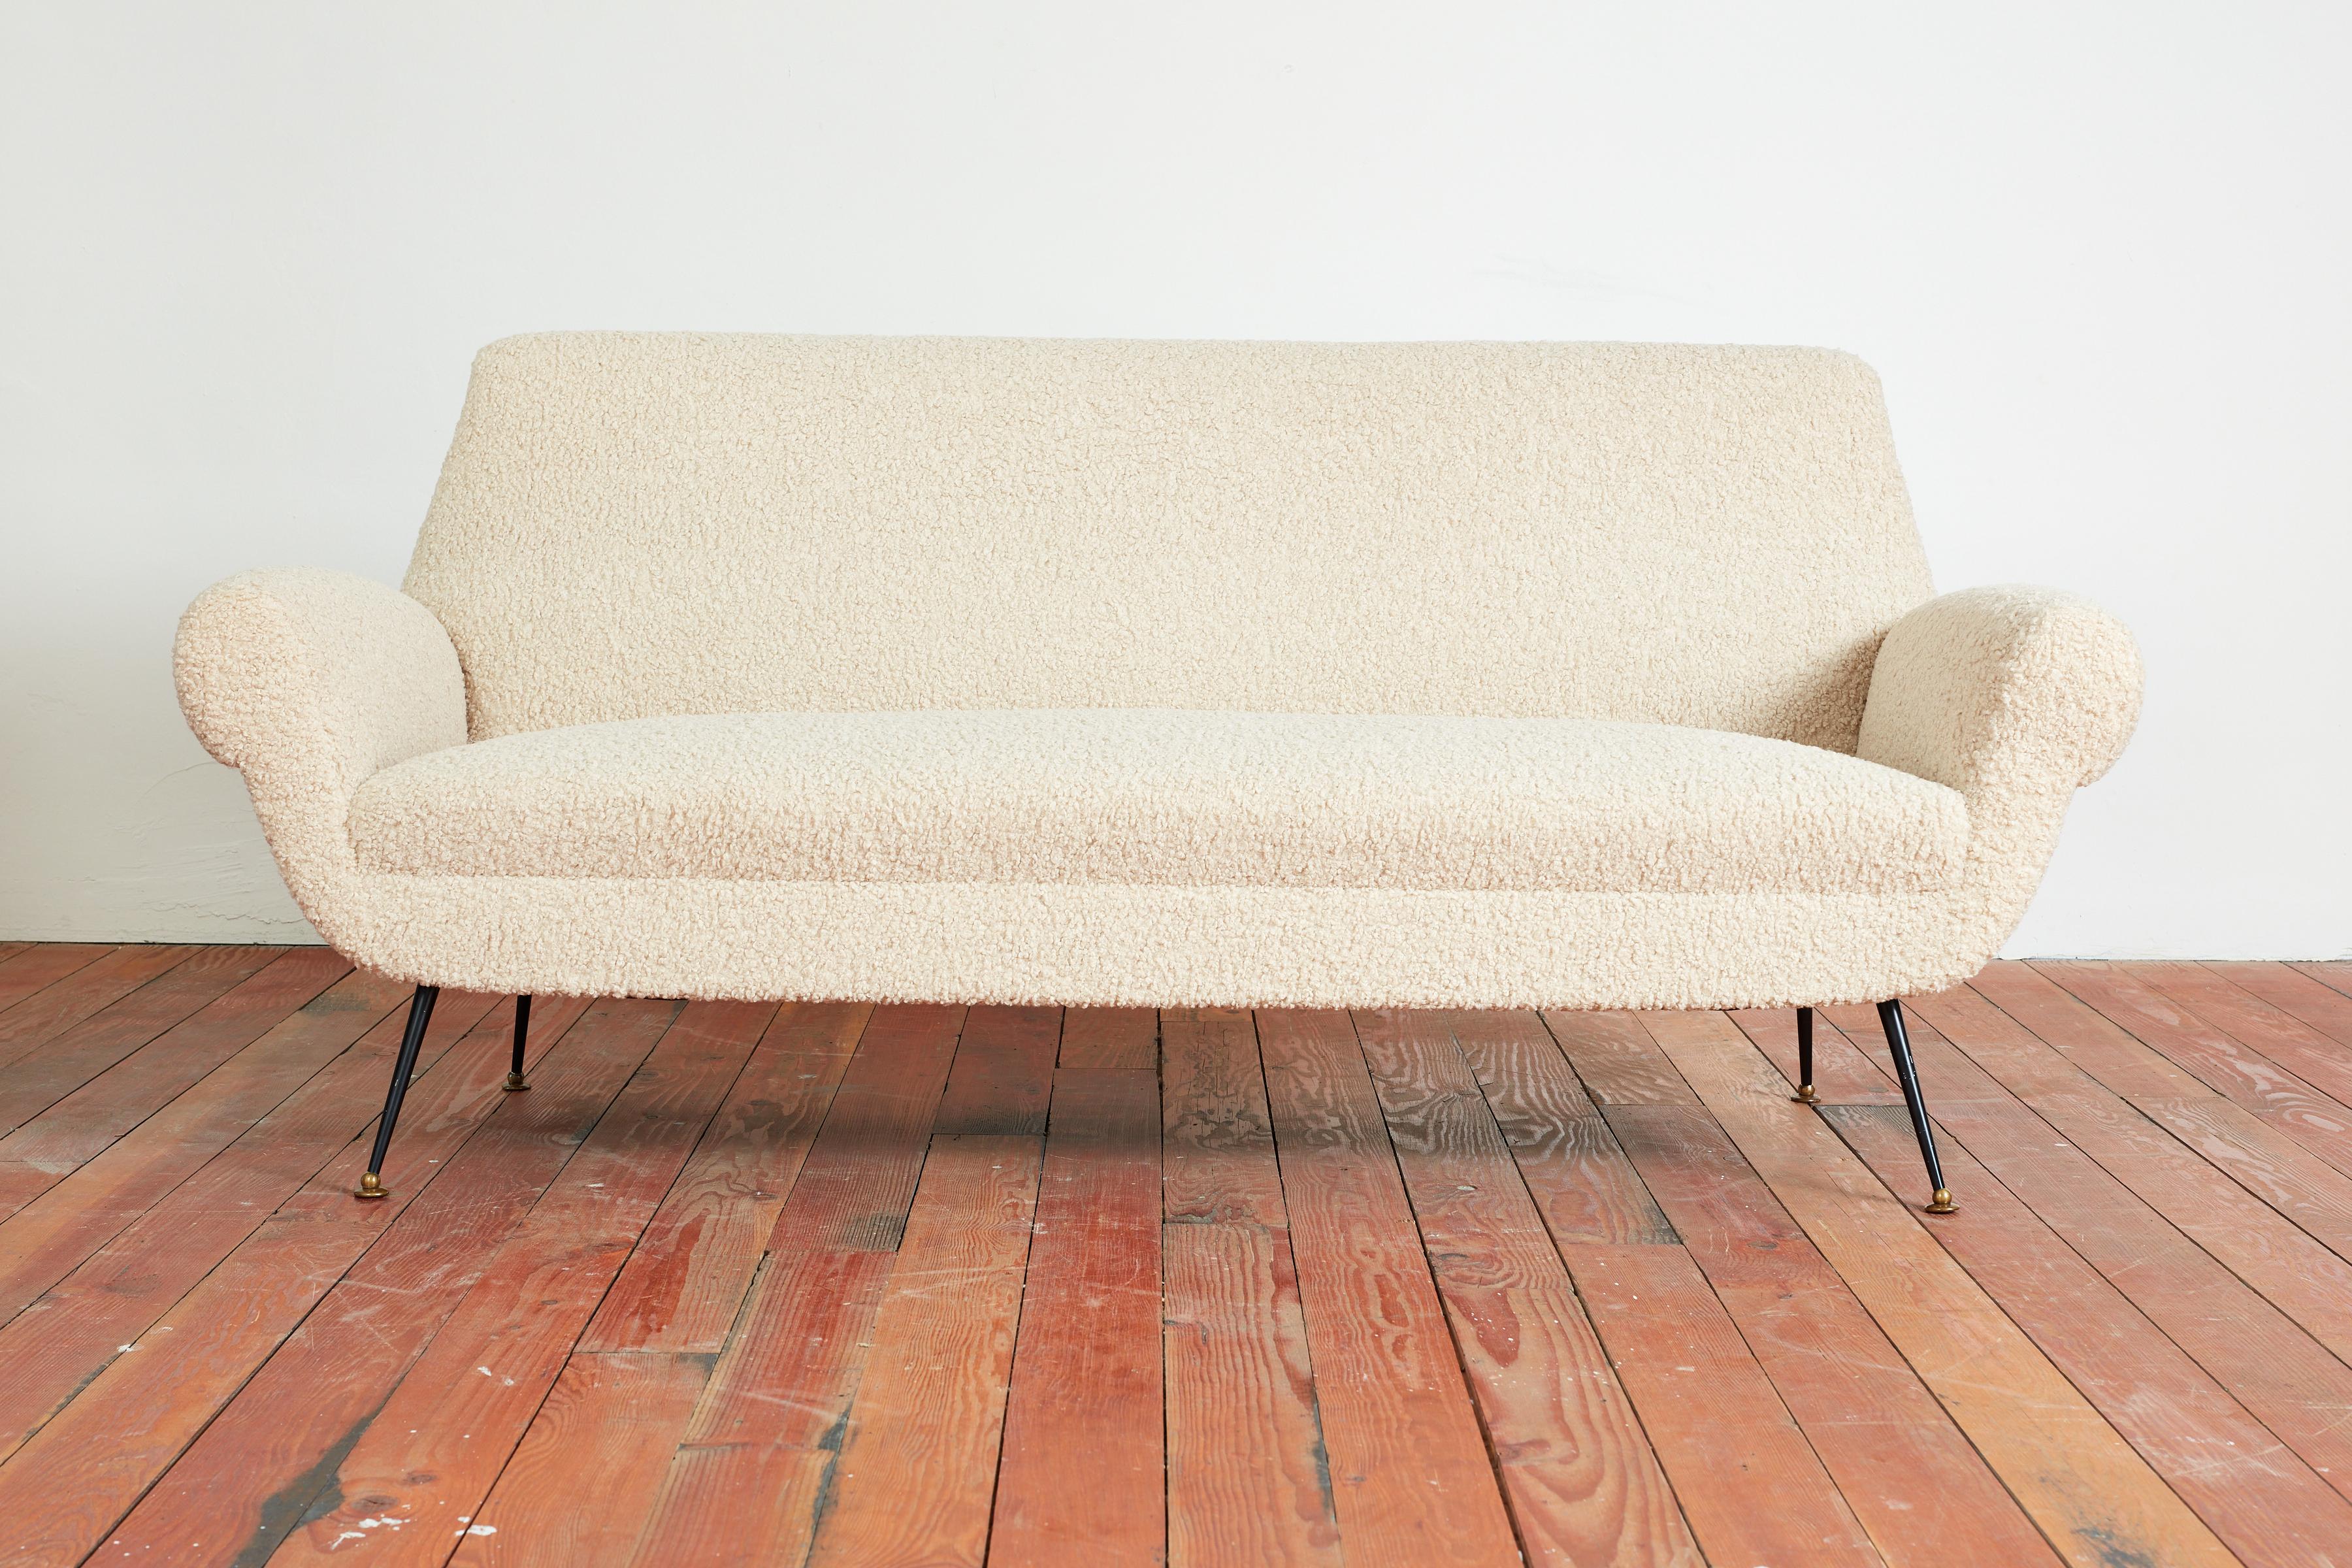 Gigi Radice sofa settee for Minotti - Italy, 1950's
Reupholstered in creamy wool boucle with iron splayed legs with brass feet.
Great curved shape with clean lines.
Matching pair of armchairs available.